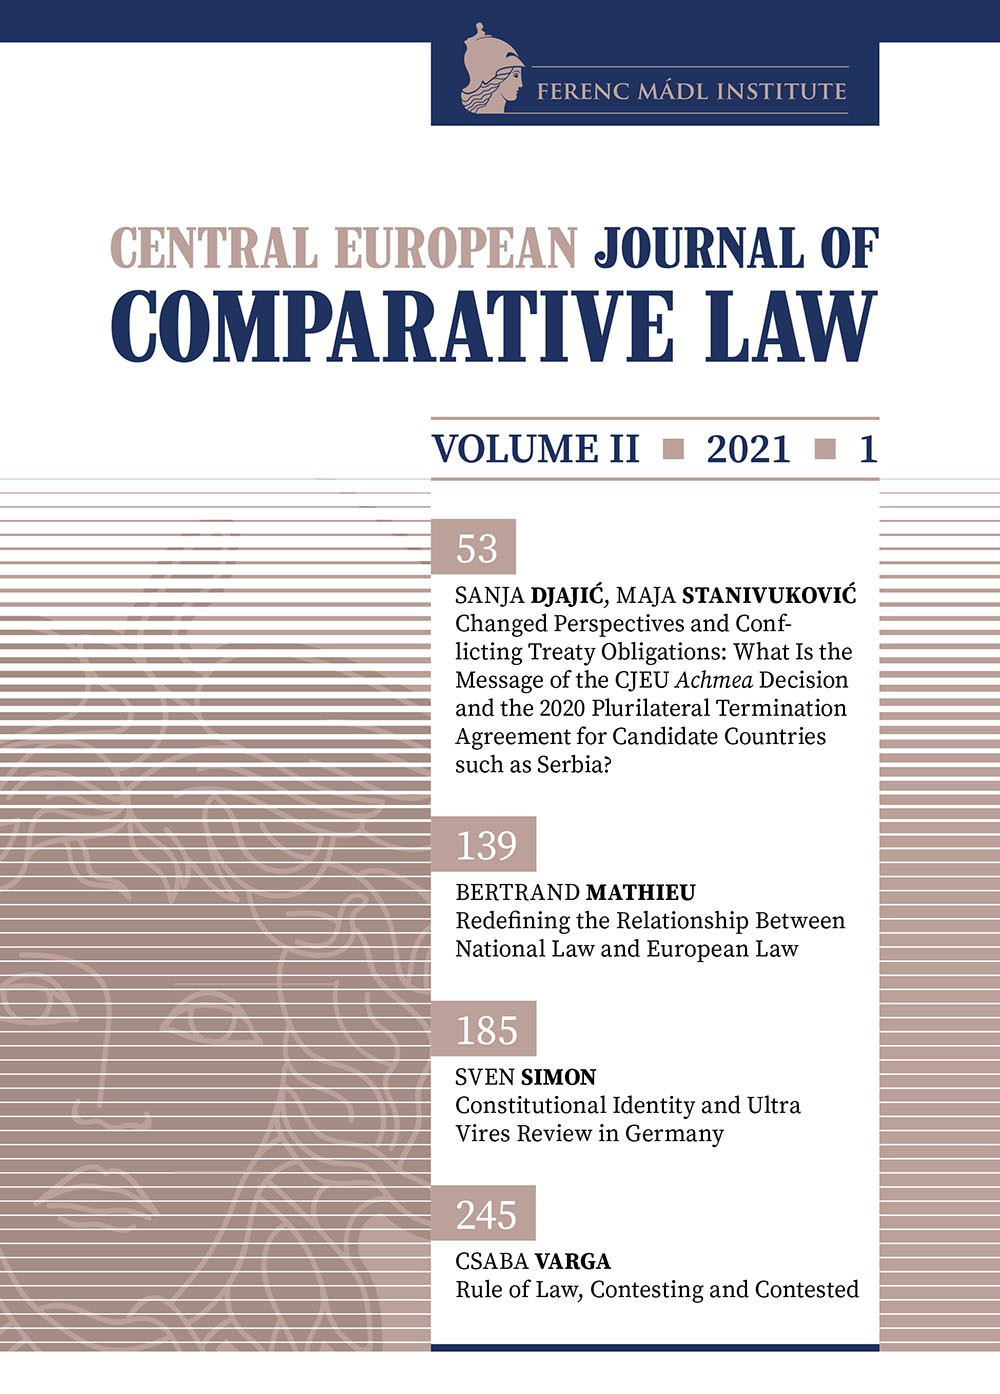 Redefining the Relationship Between National Law and European Law Cover Image